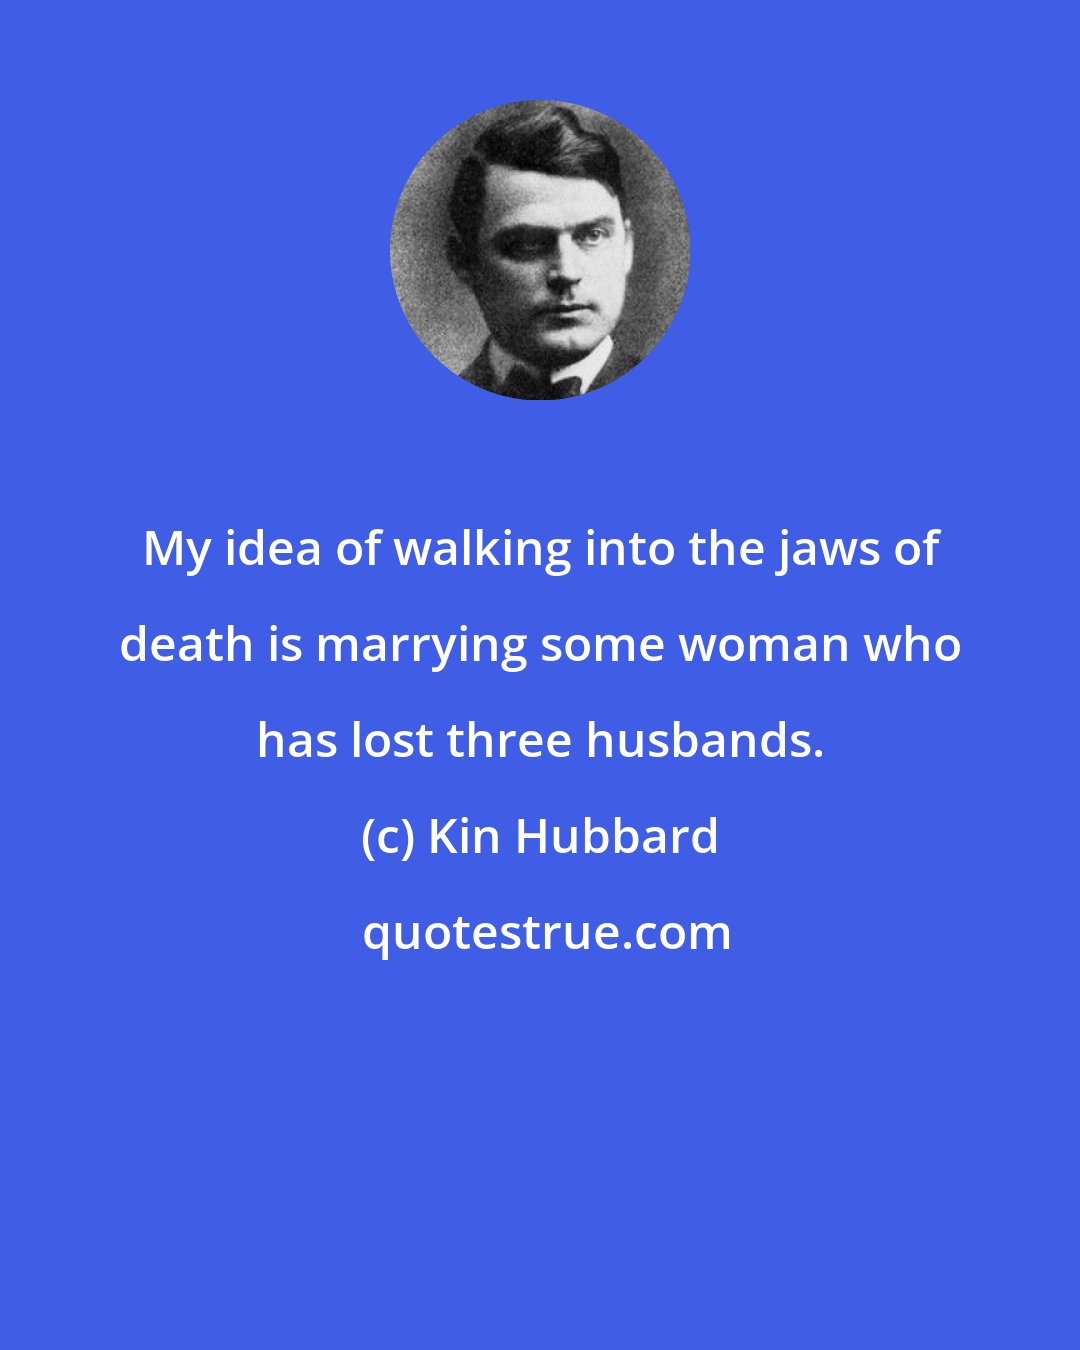 Kin Hubbard: My idea of walking into the jaws of death is marrying some woman who has lost three husbands.